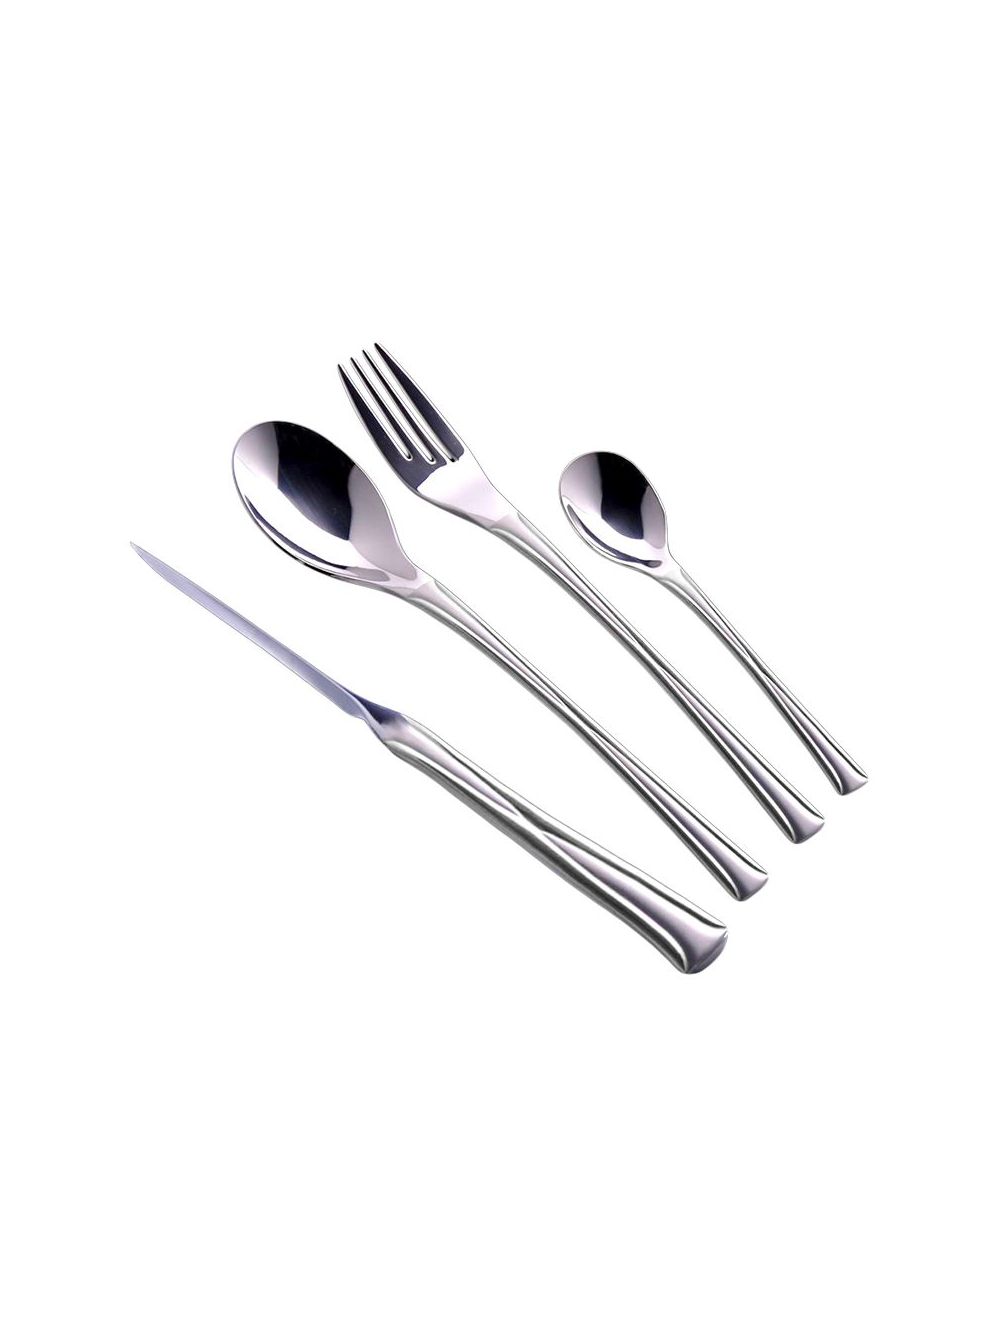 Dessini 134 Pcs High Quality Stainless Steel Cutlery Set -AKAT219